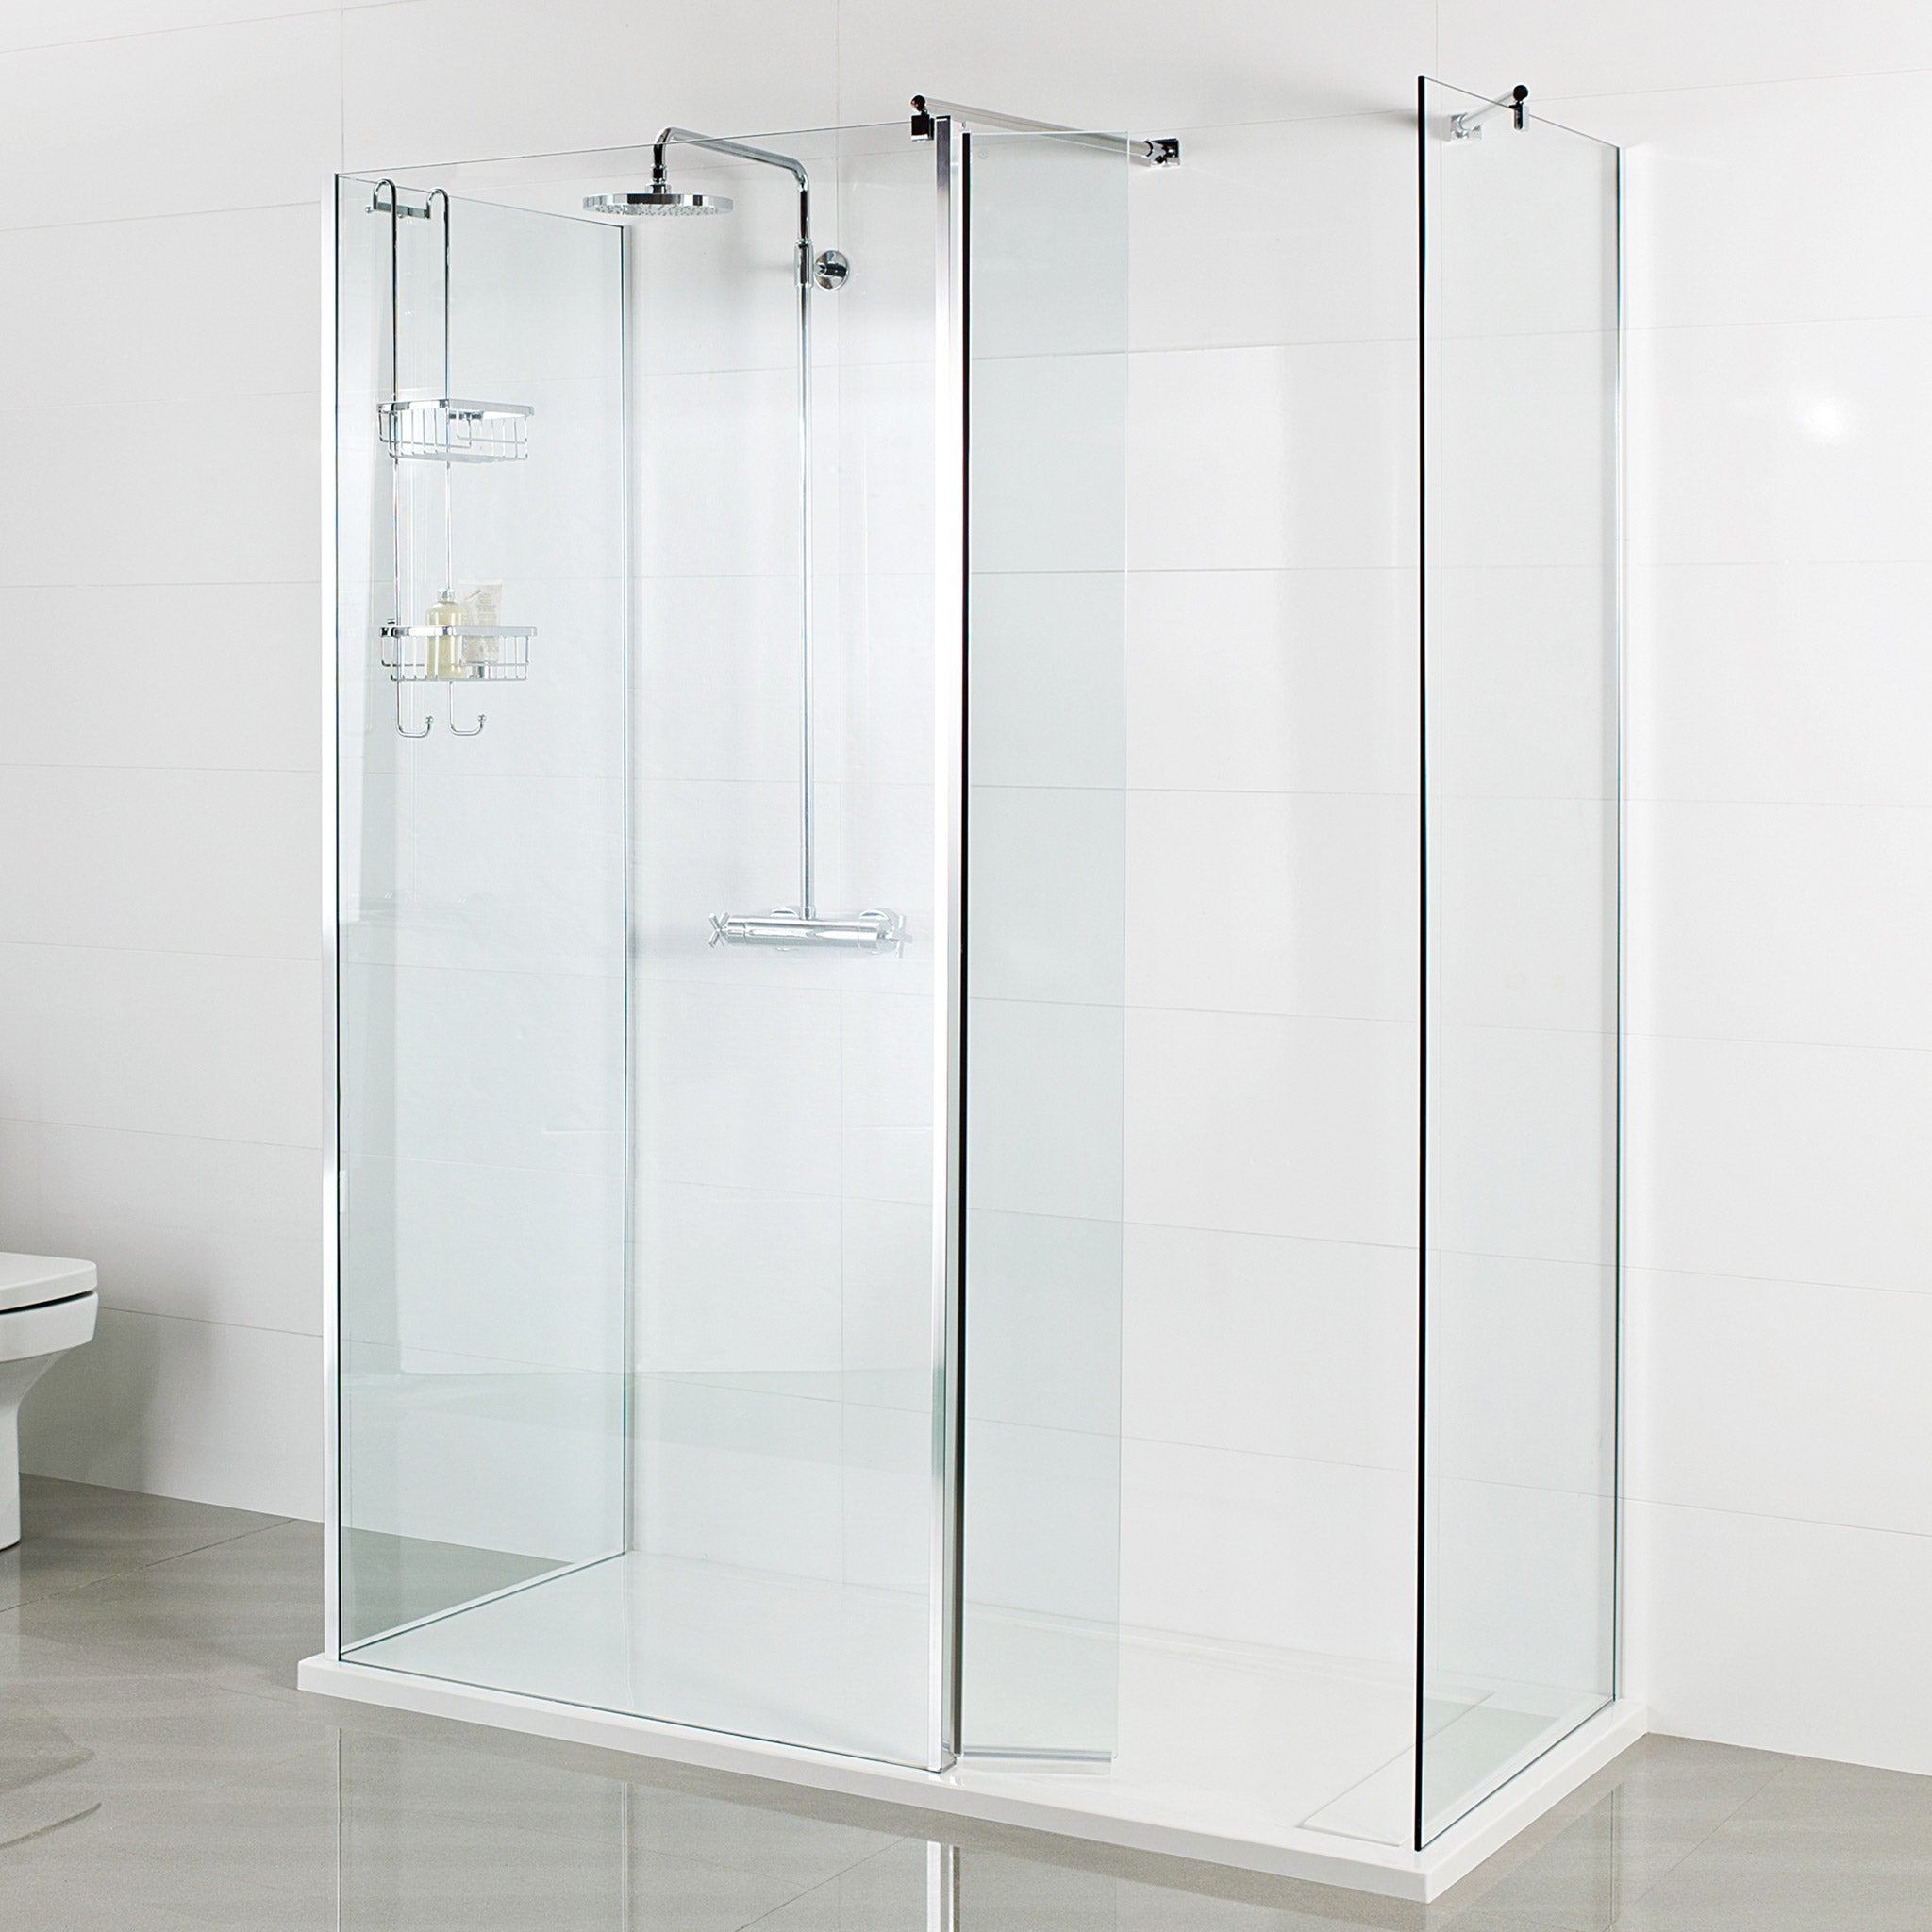 Glass To Glass Wetroom Panel + 2x Corner Wetrooms + Pivoting Deflector Panel 